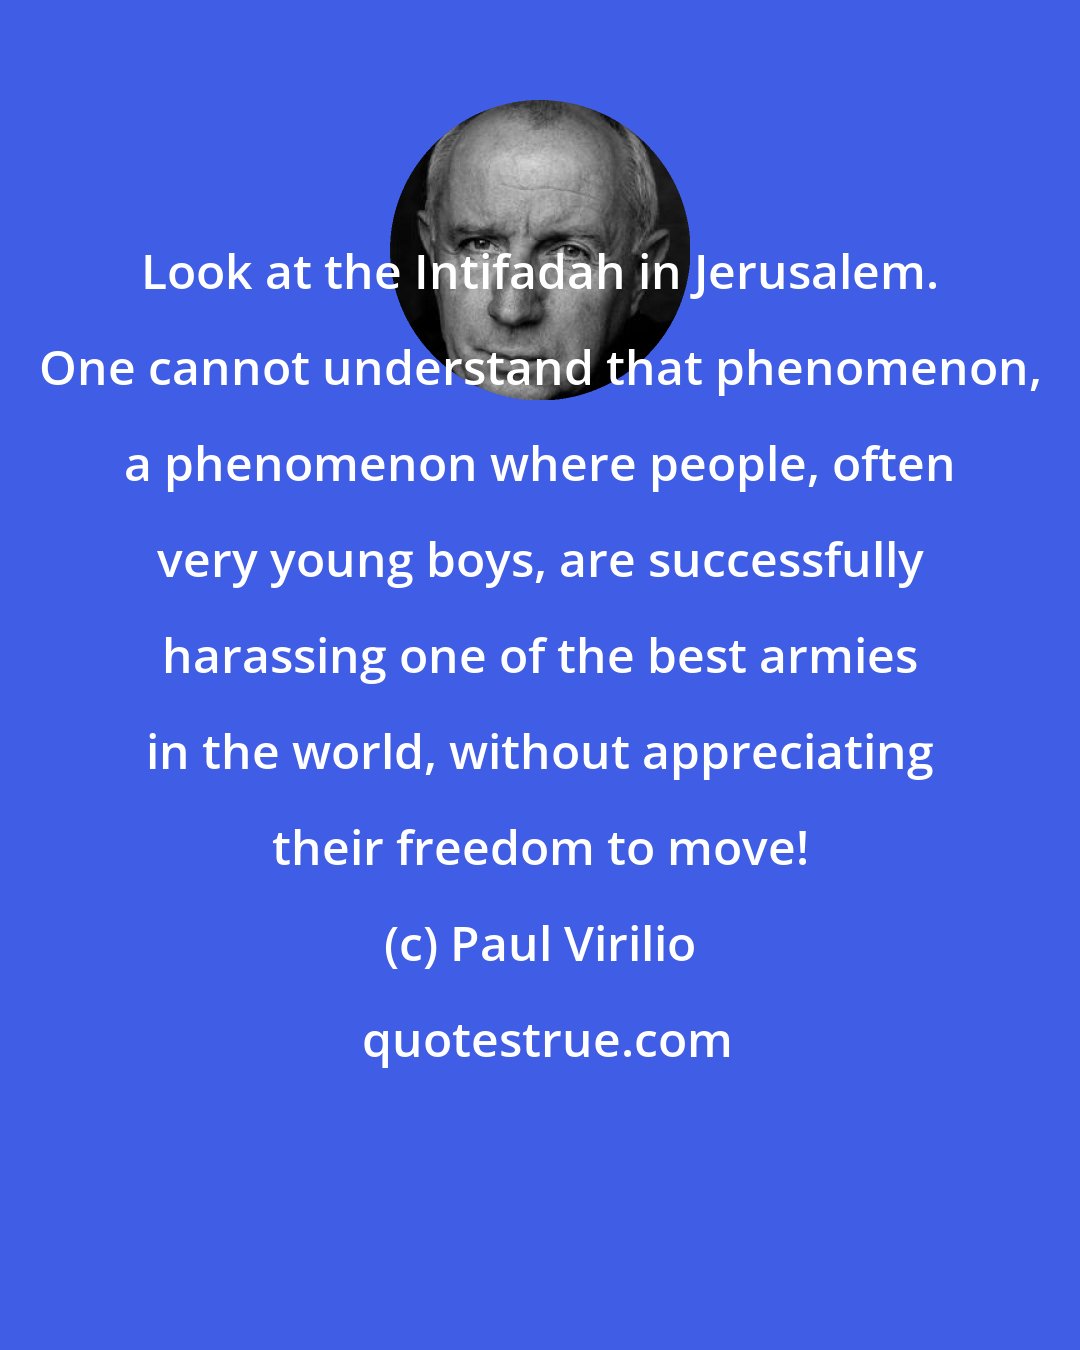 Paul Virilio: Look at the Intifadah in Jerusalem. One cannot understand that phenomenon, a phenomenon where people, often very young boys, are successfully harassing one of the best armies in the world, without appreciating their freedom to move!